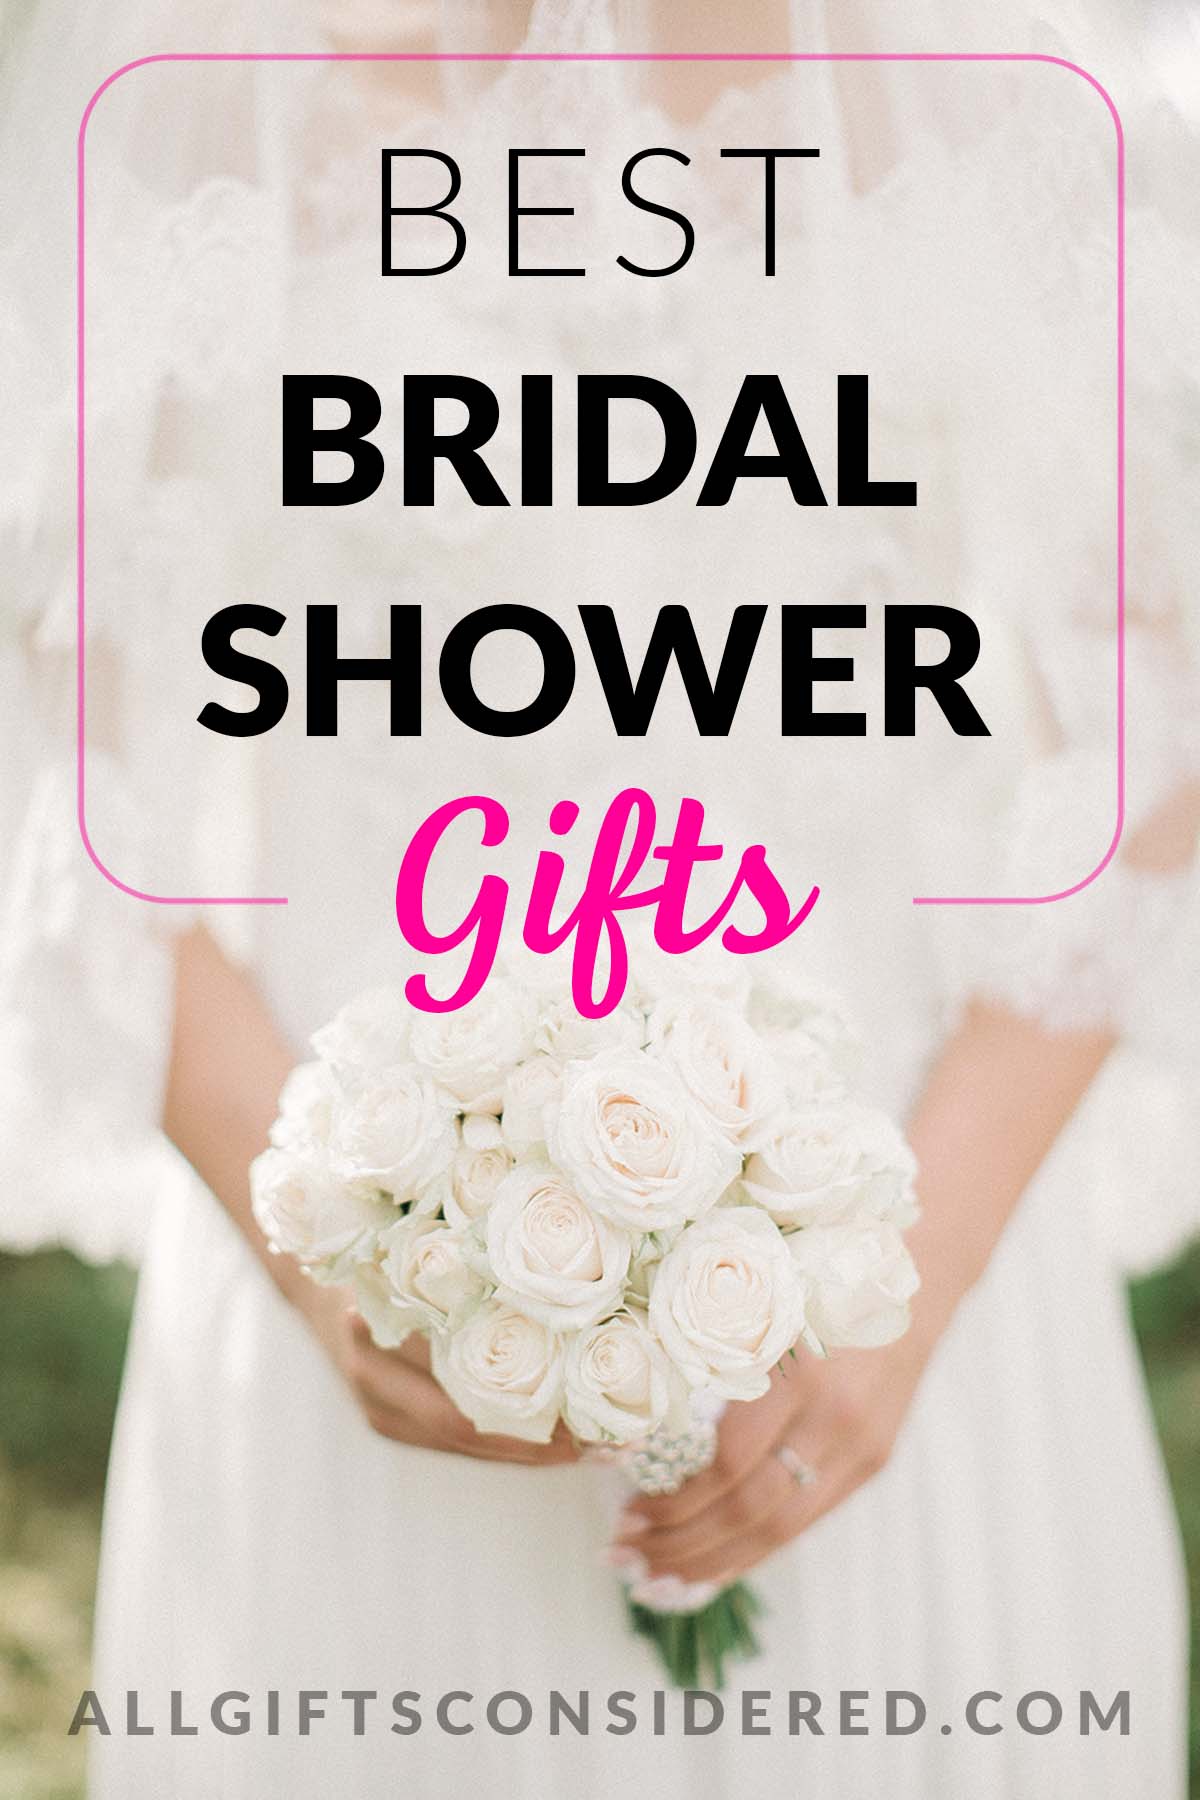 Bridal Shower Gifts - Feat Image